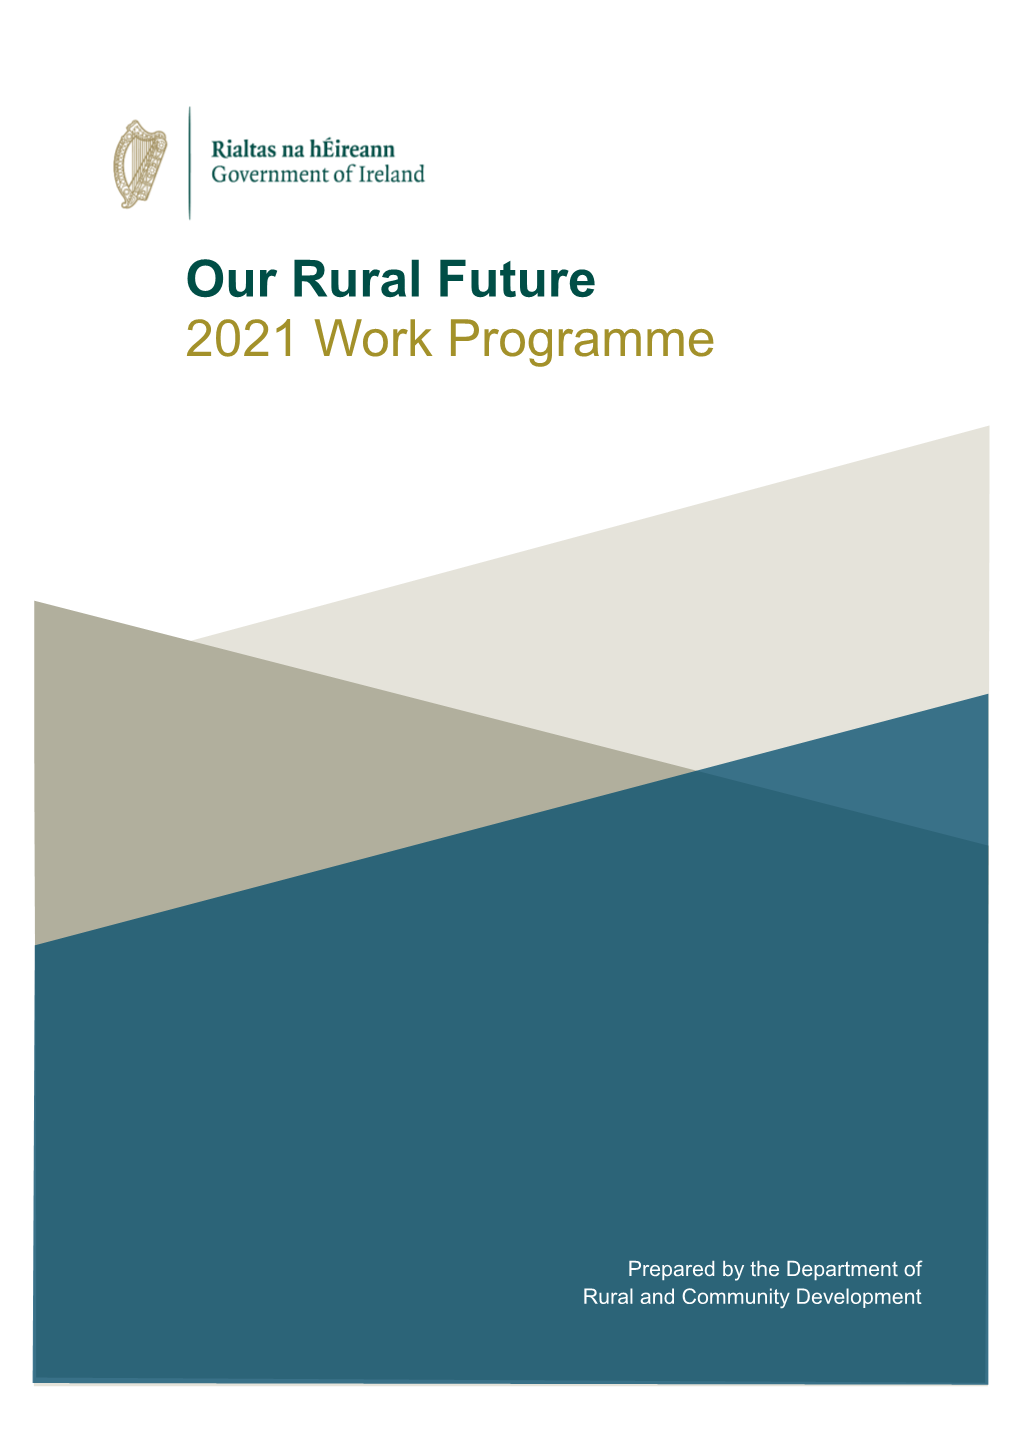 Our Rural Future 2021 Work Programme